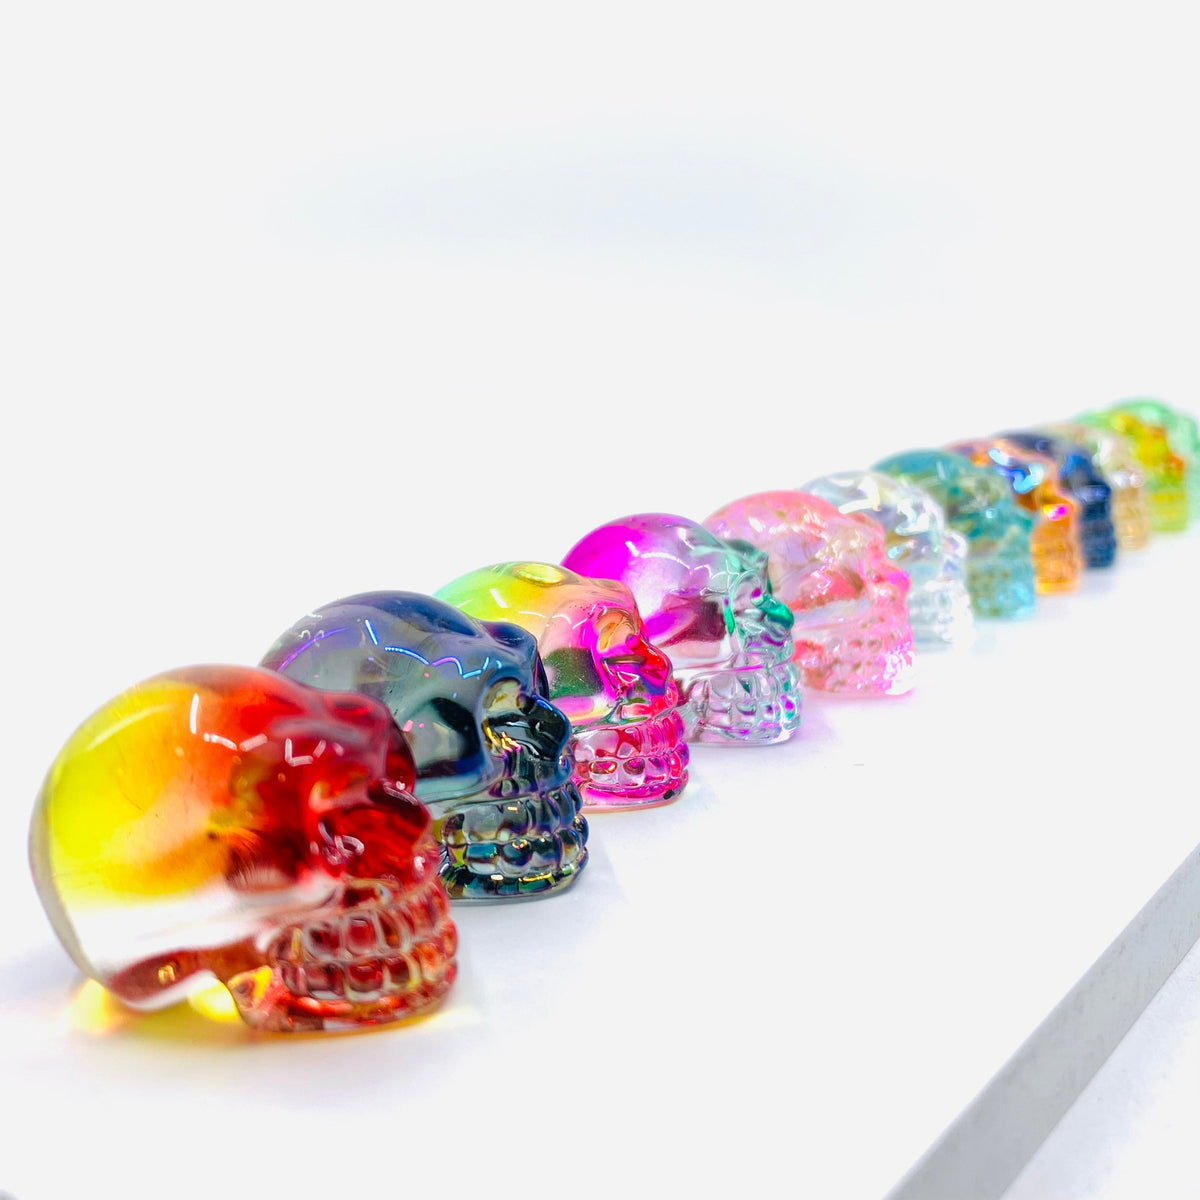 Colorful Glass Skulls Manufactured Overseas 